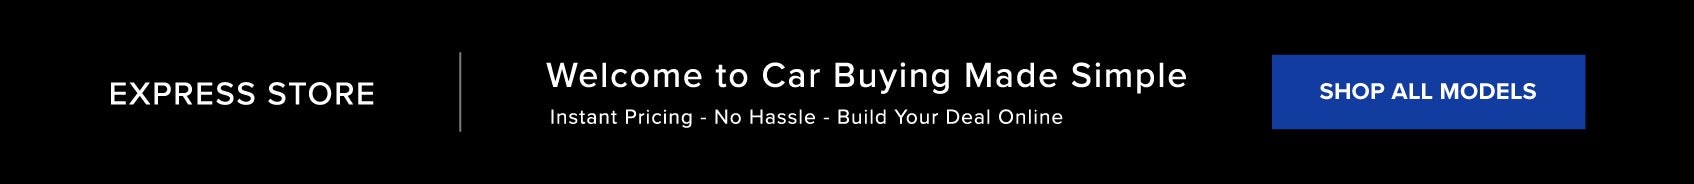 welcome to car buying made simple